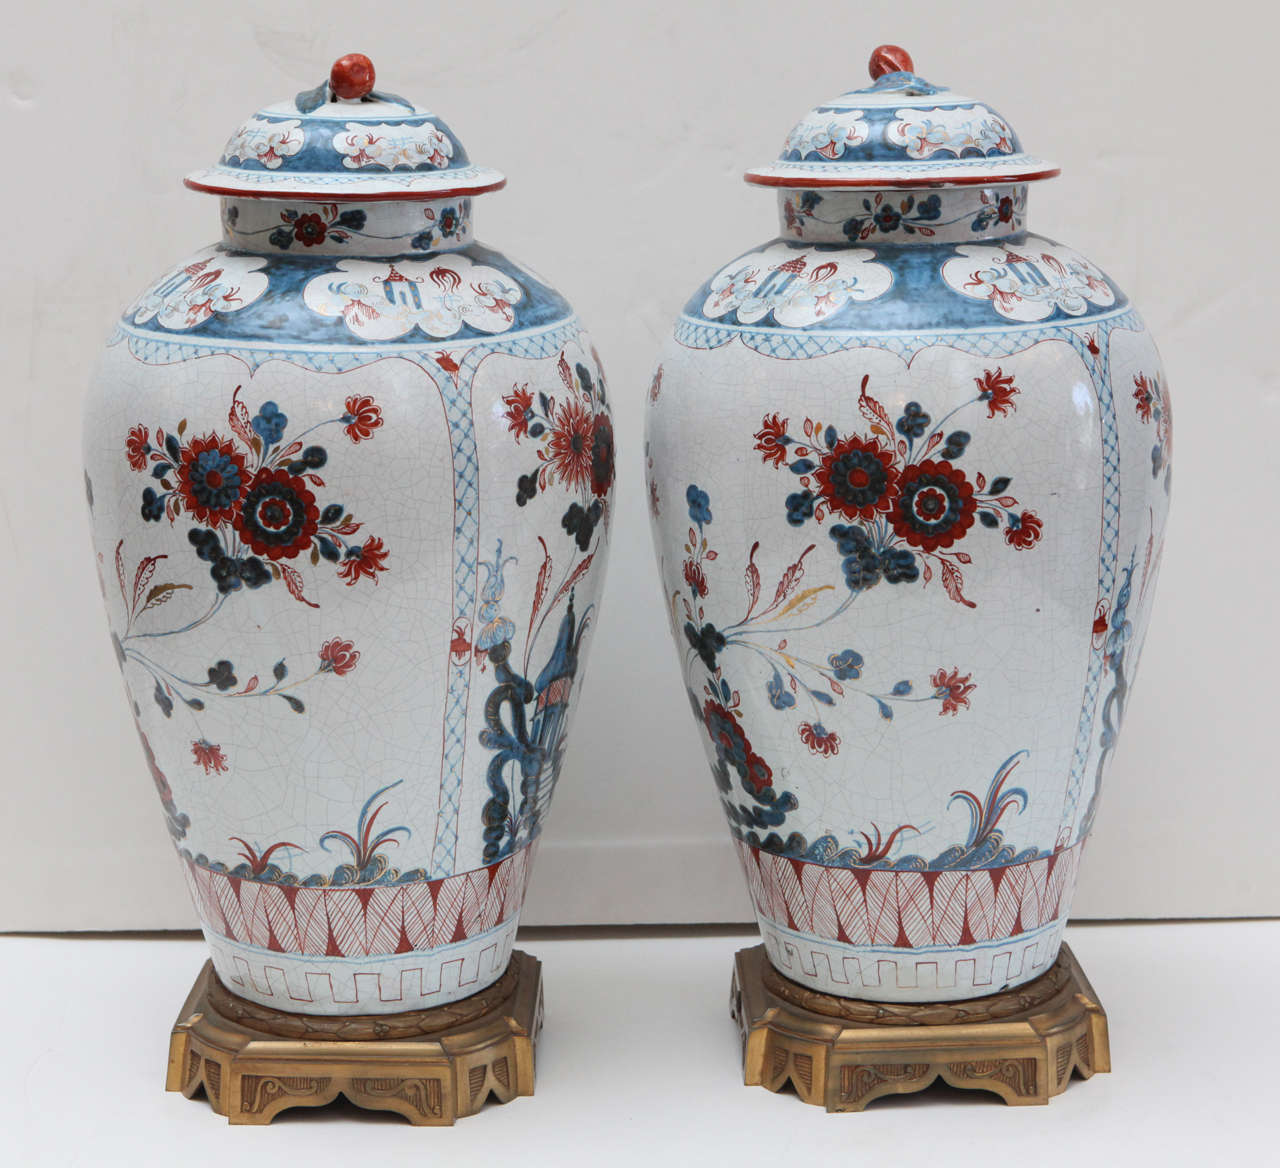 Pair of Hand-Painted, Delft Urns 1